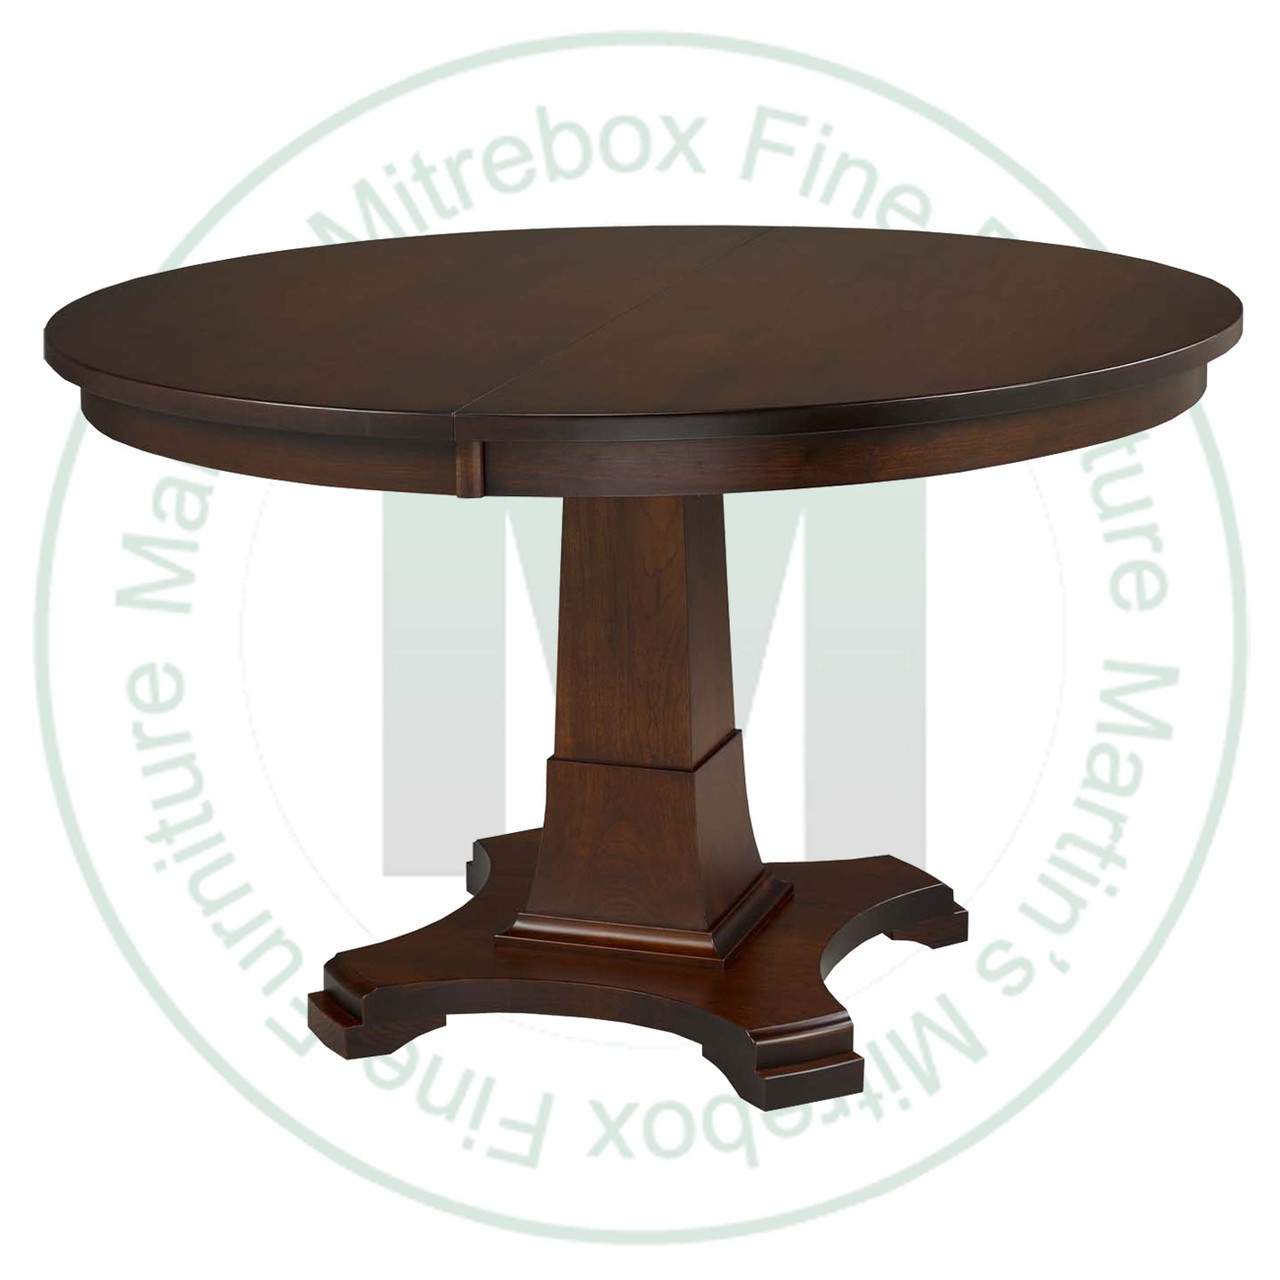 Wormy Maple Abbey Single Pedestal Table 36''D x 42''W x 30''H With 2 - 12'' Leaves. Table Has 1.25'' Thick Top